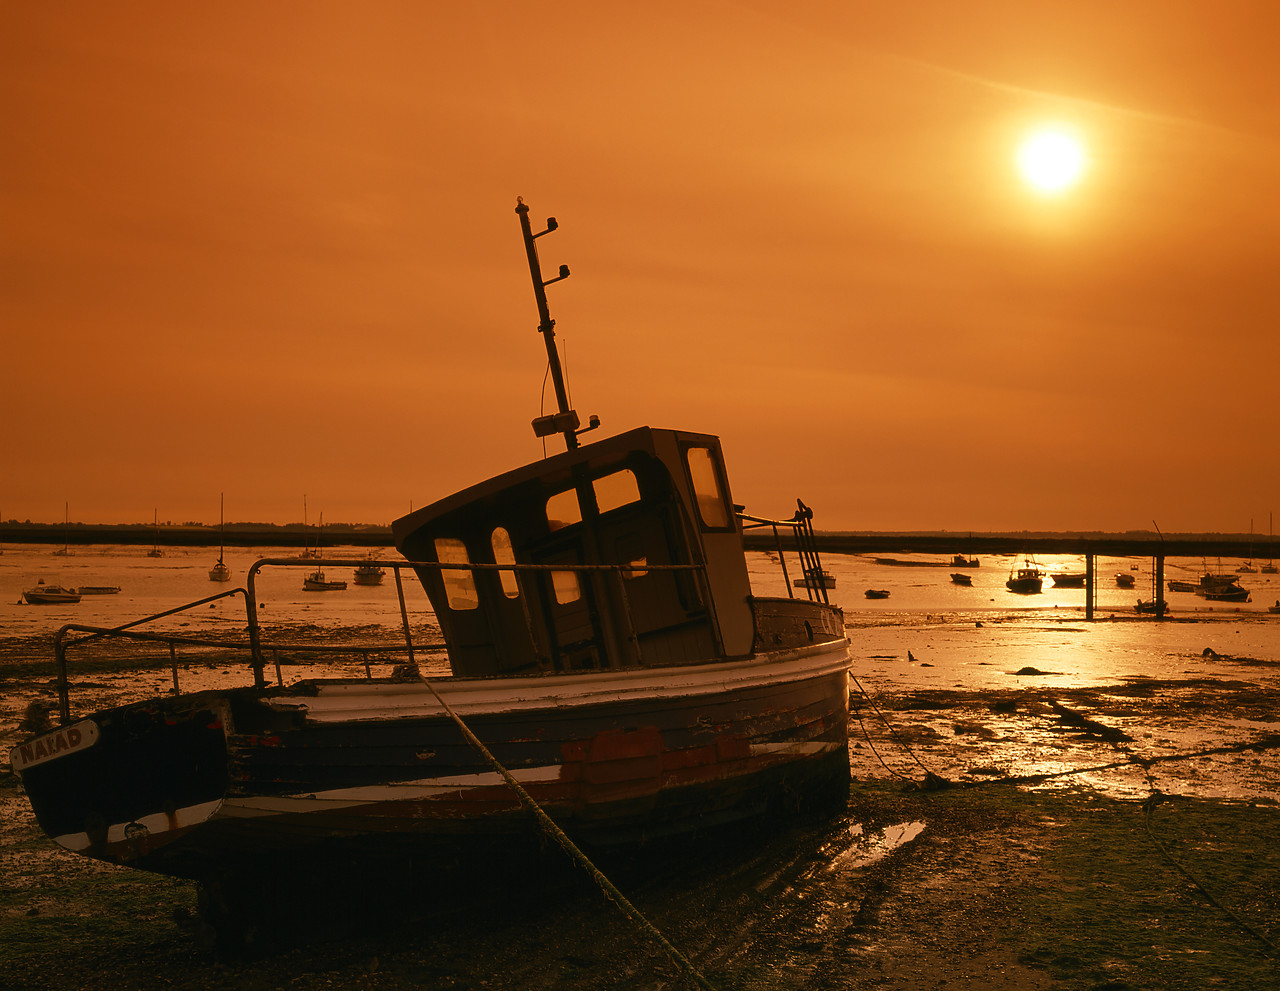 #944545 - Fishing Boat at Sunset, West Mersea, Essex, England